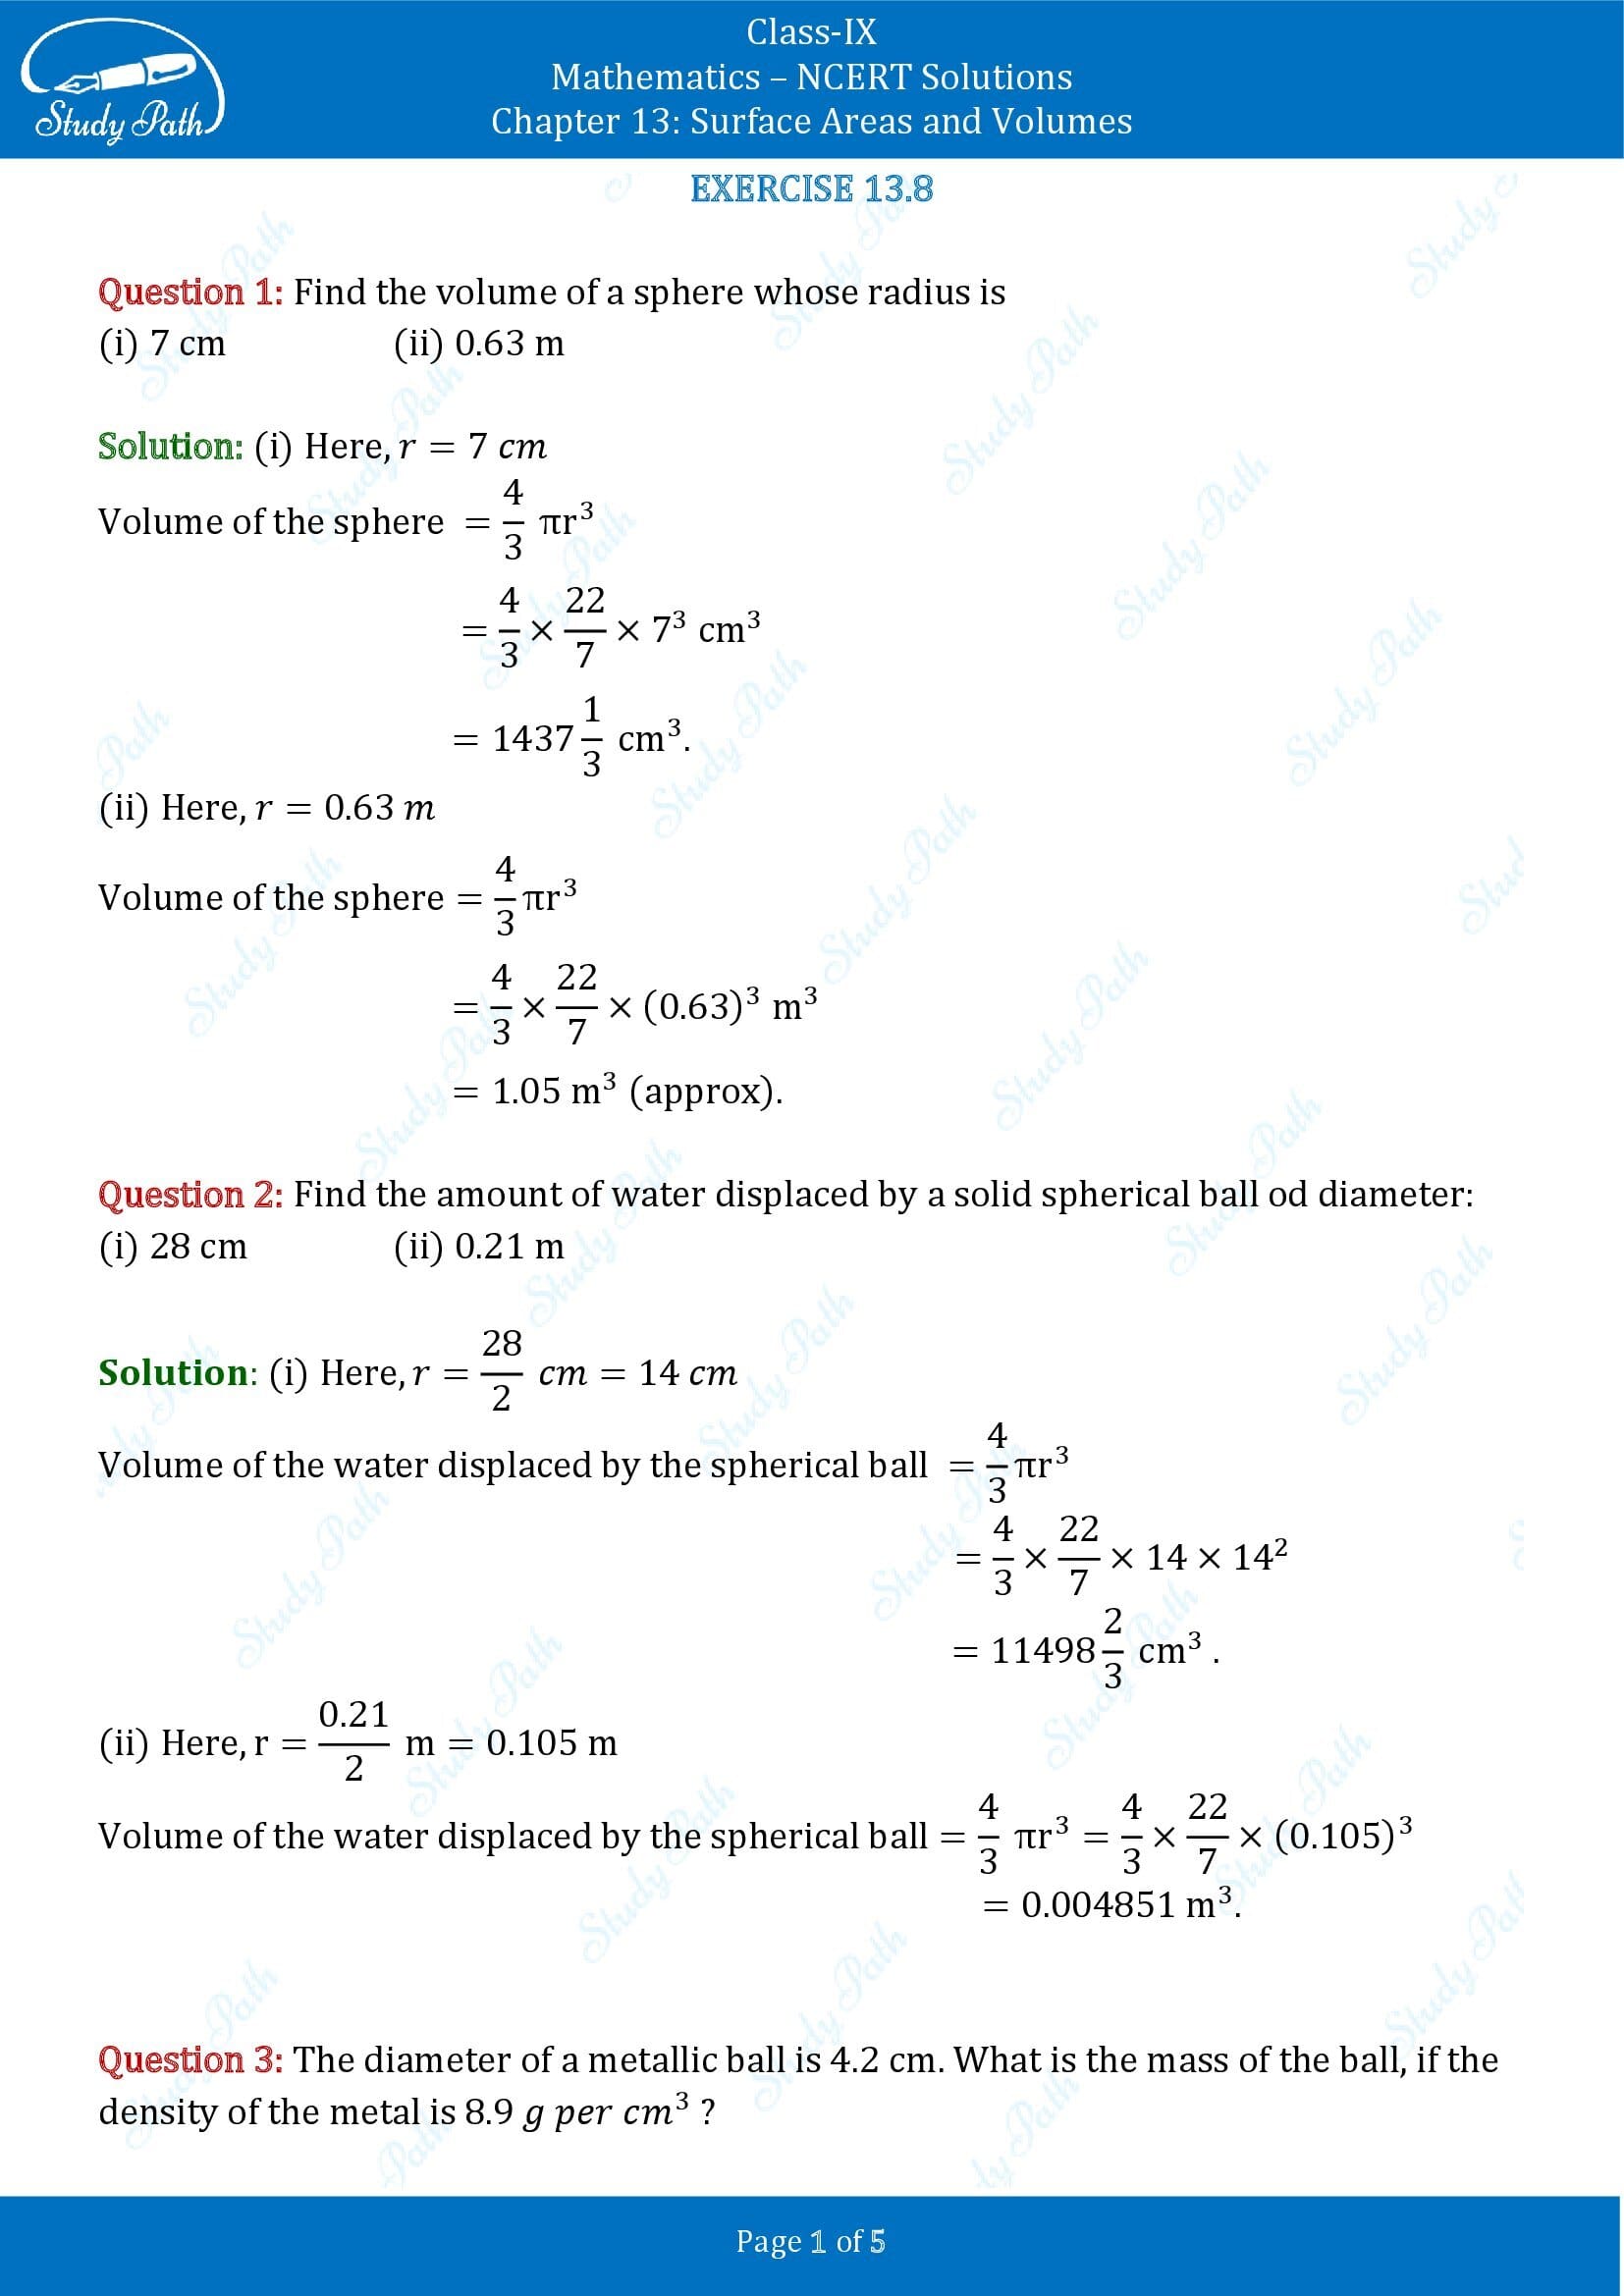 NCERT Solutions for Class 9 Maths Chapter 13 Surface Areas and Volumes Exercise 13.8 00001